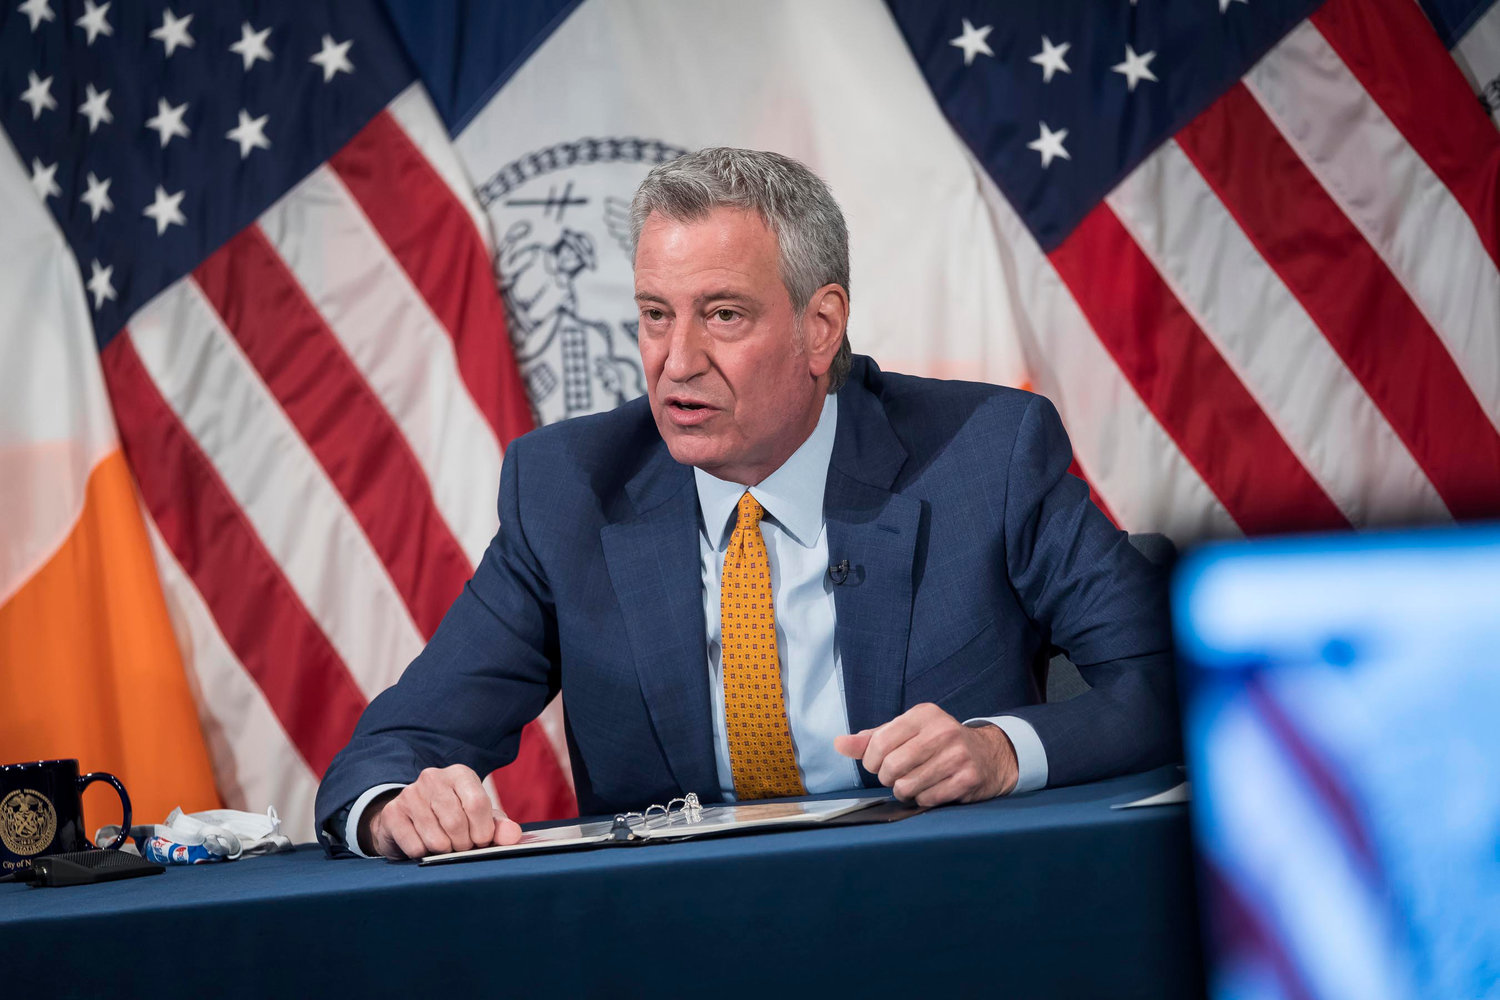 Mayor Bill de Blasio recommends everyone — including those vaccinated — wear masks indoors, but stopped short Monday of calling for a mandate.